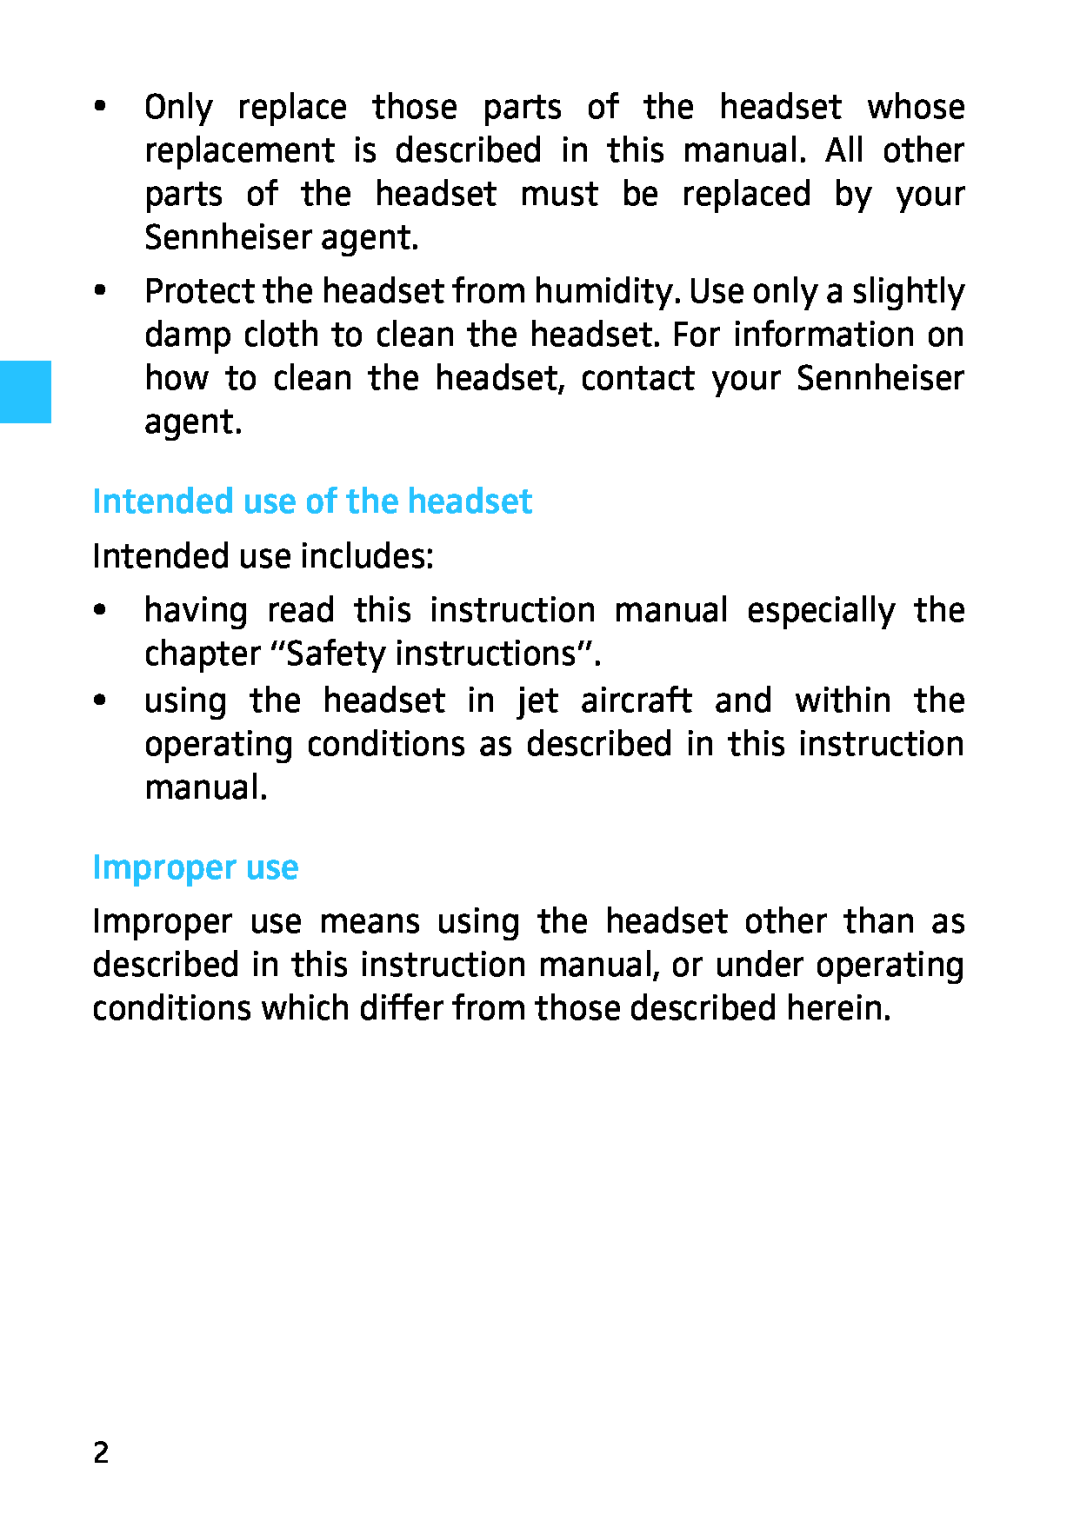 Sennheiser 523983/A01, HMEC 26, 502399 instruction manual Intended use of the headset, Improper use, Intended use includes 